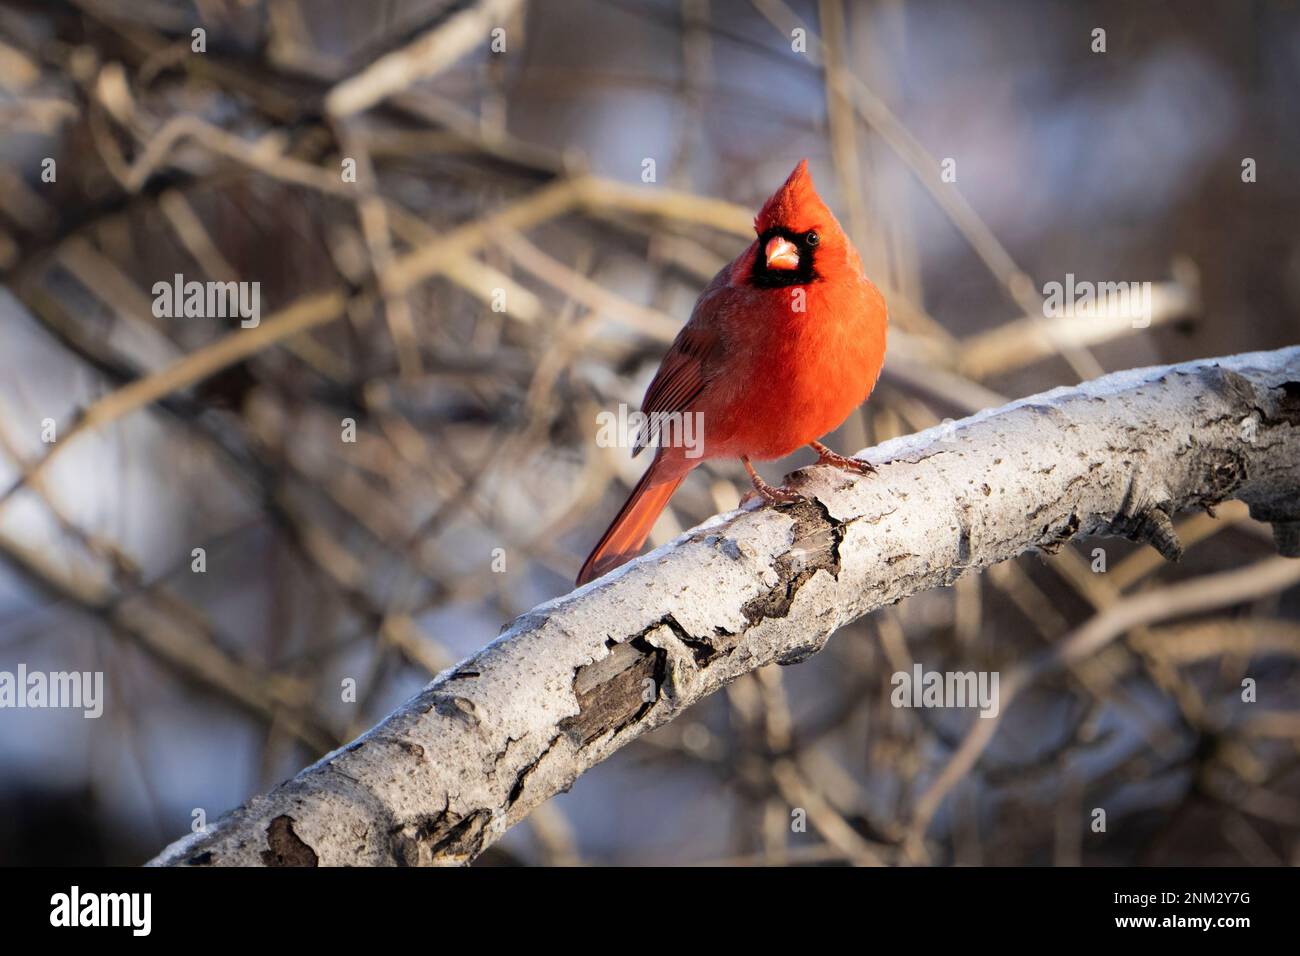 Northern Cardinal perched near a bird feeder during winter. Stock Photo